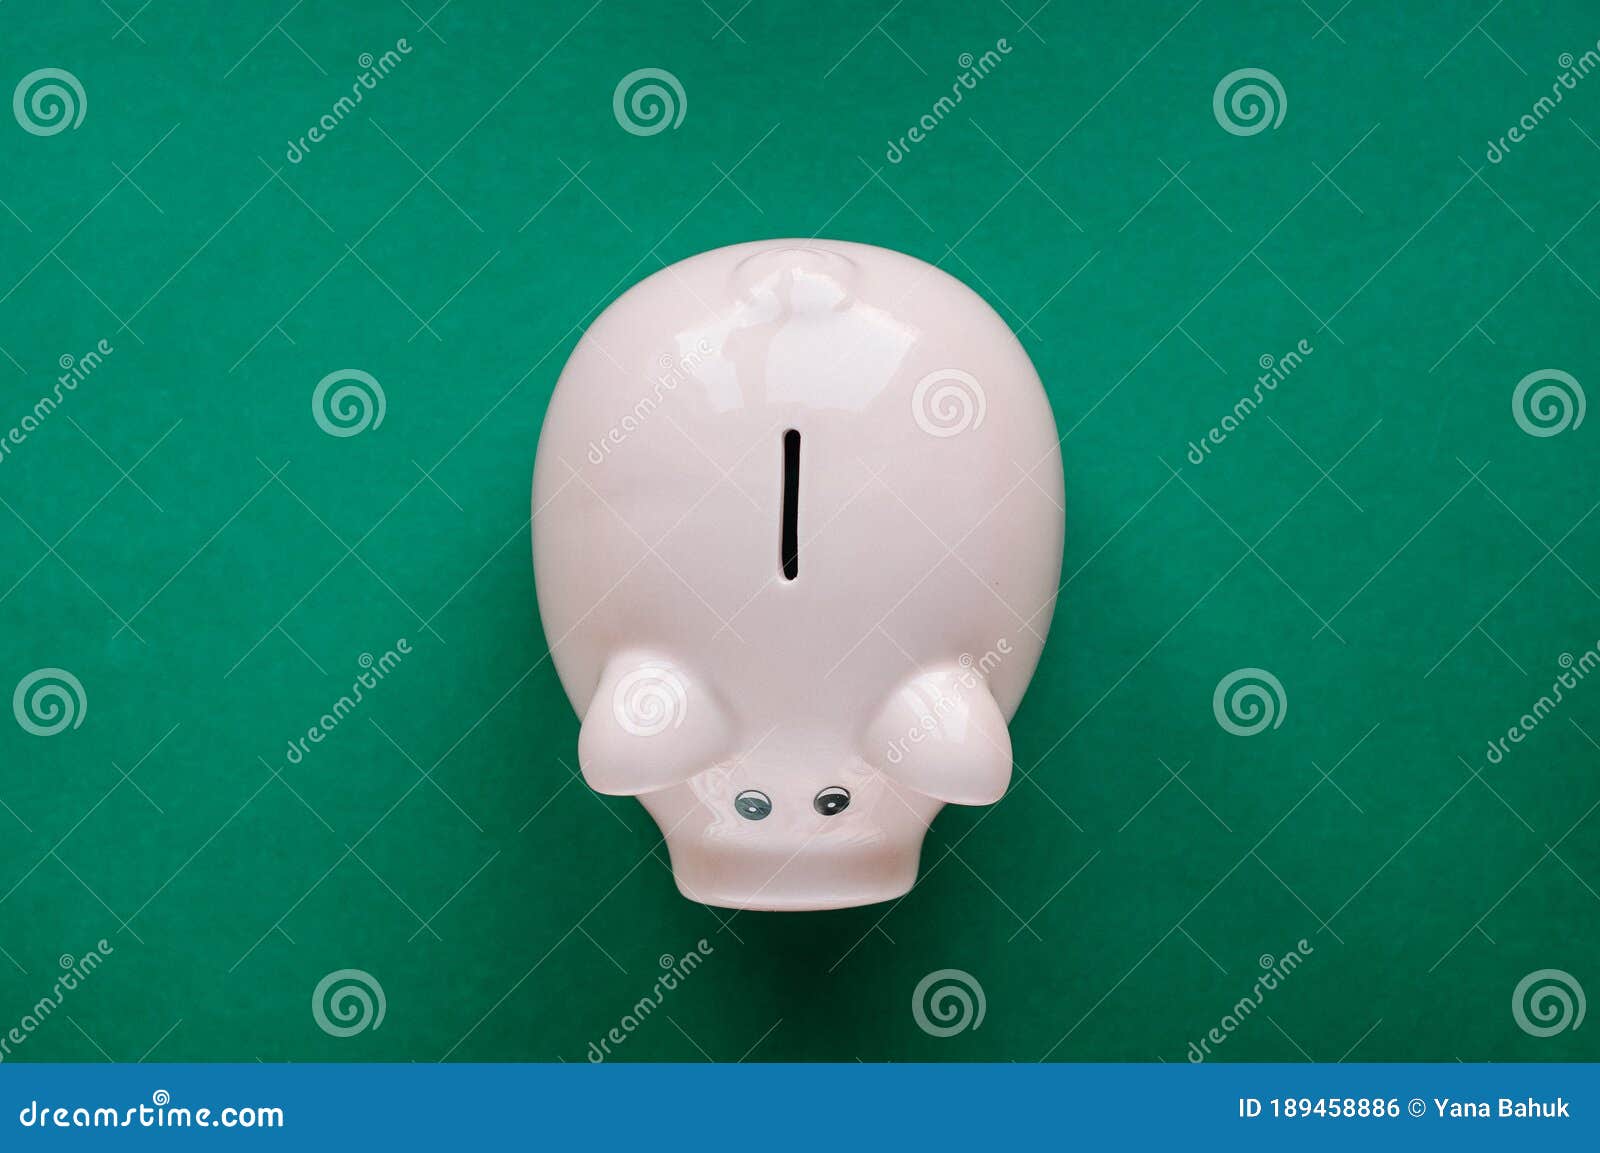 a piggy bank saving and investment theme on a green paper background,